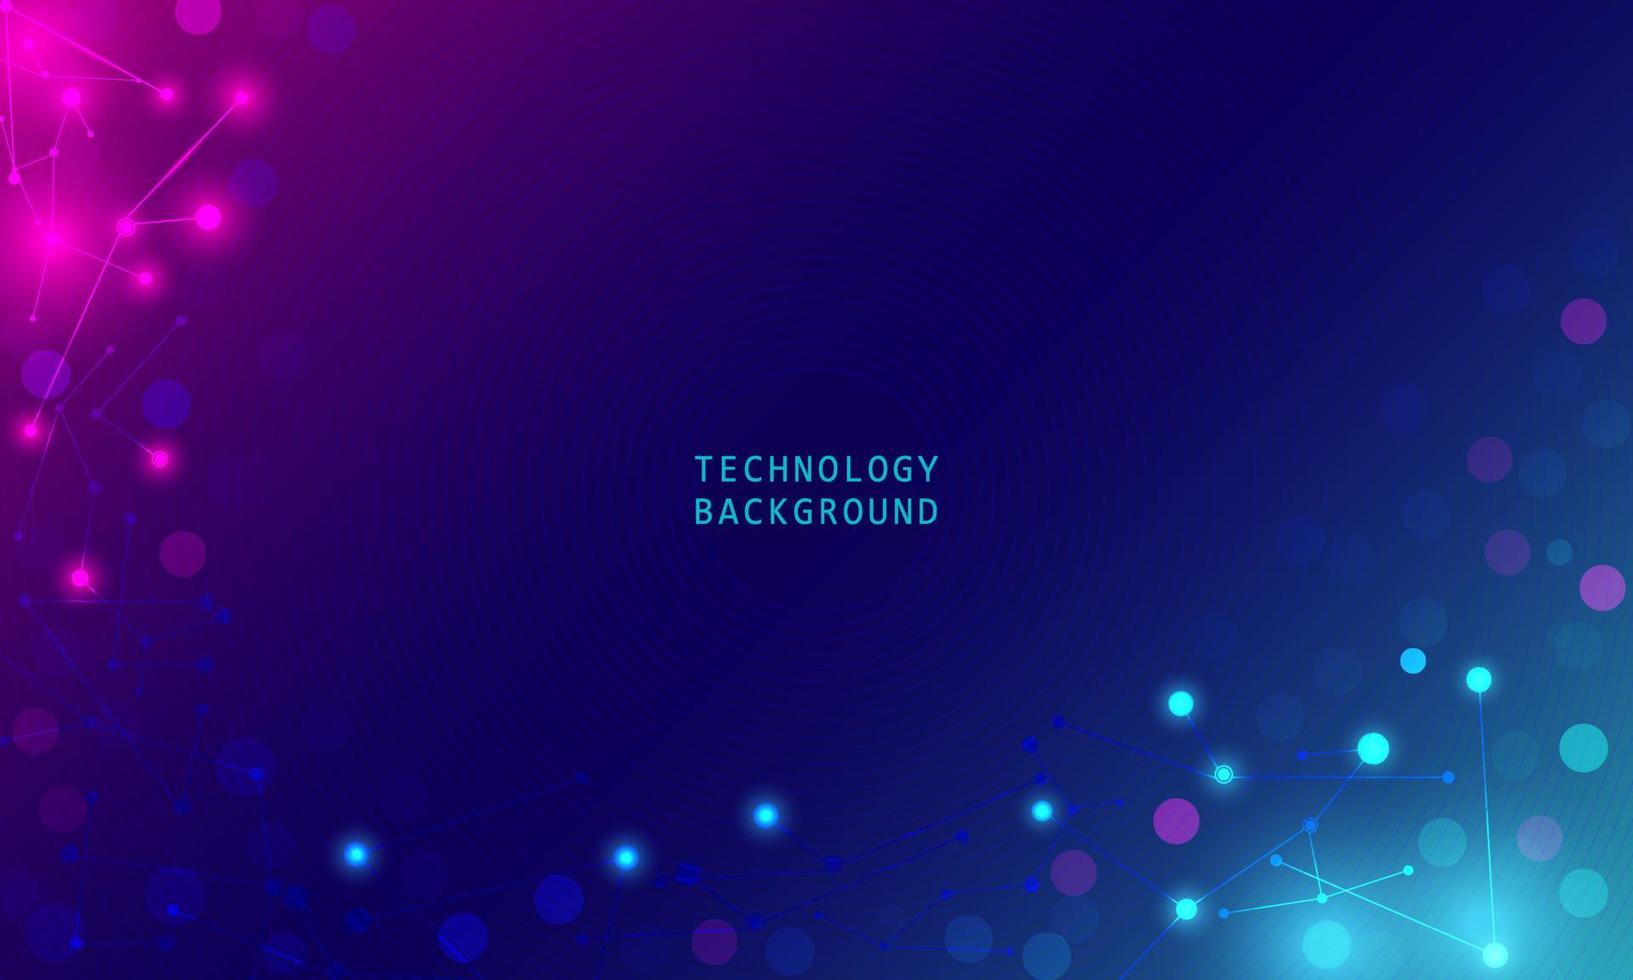 Wave of particles on blue background. abstract technology particles mesh background. vector